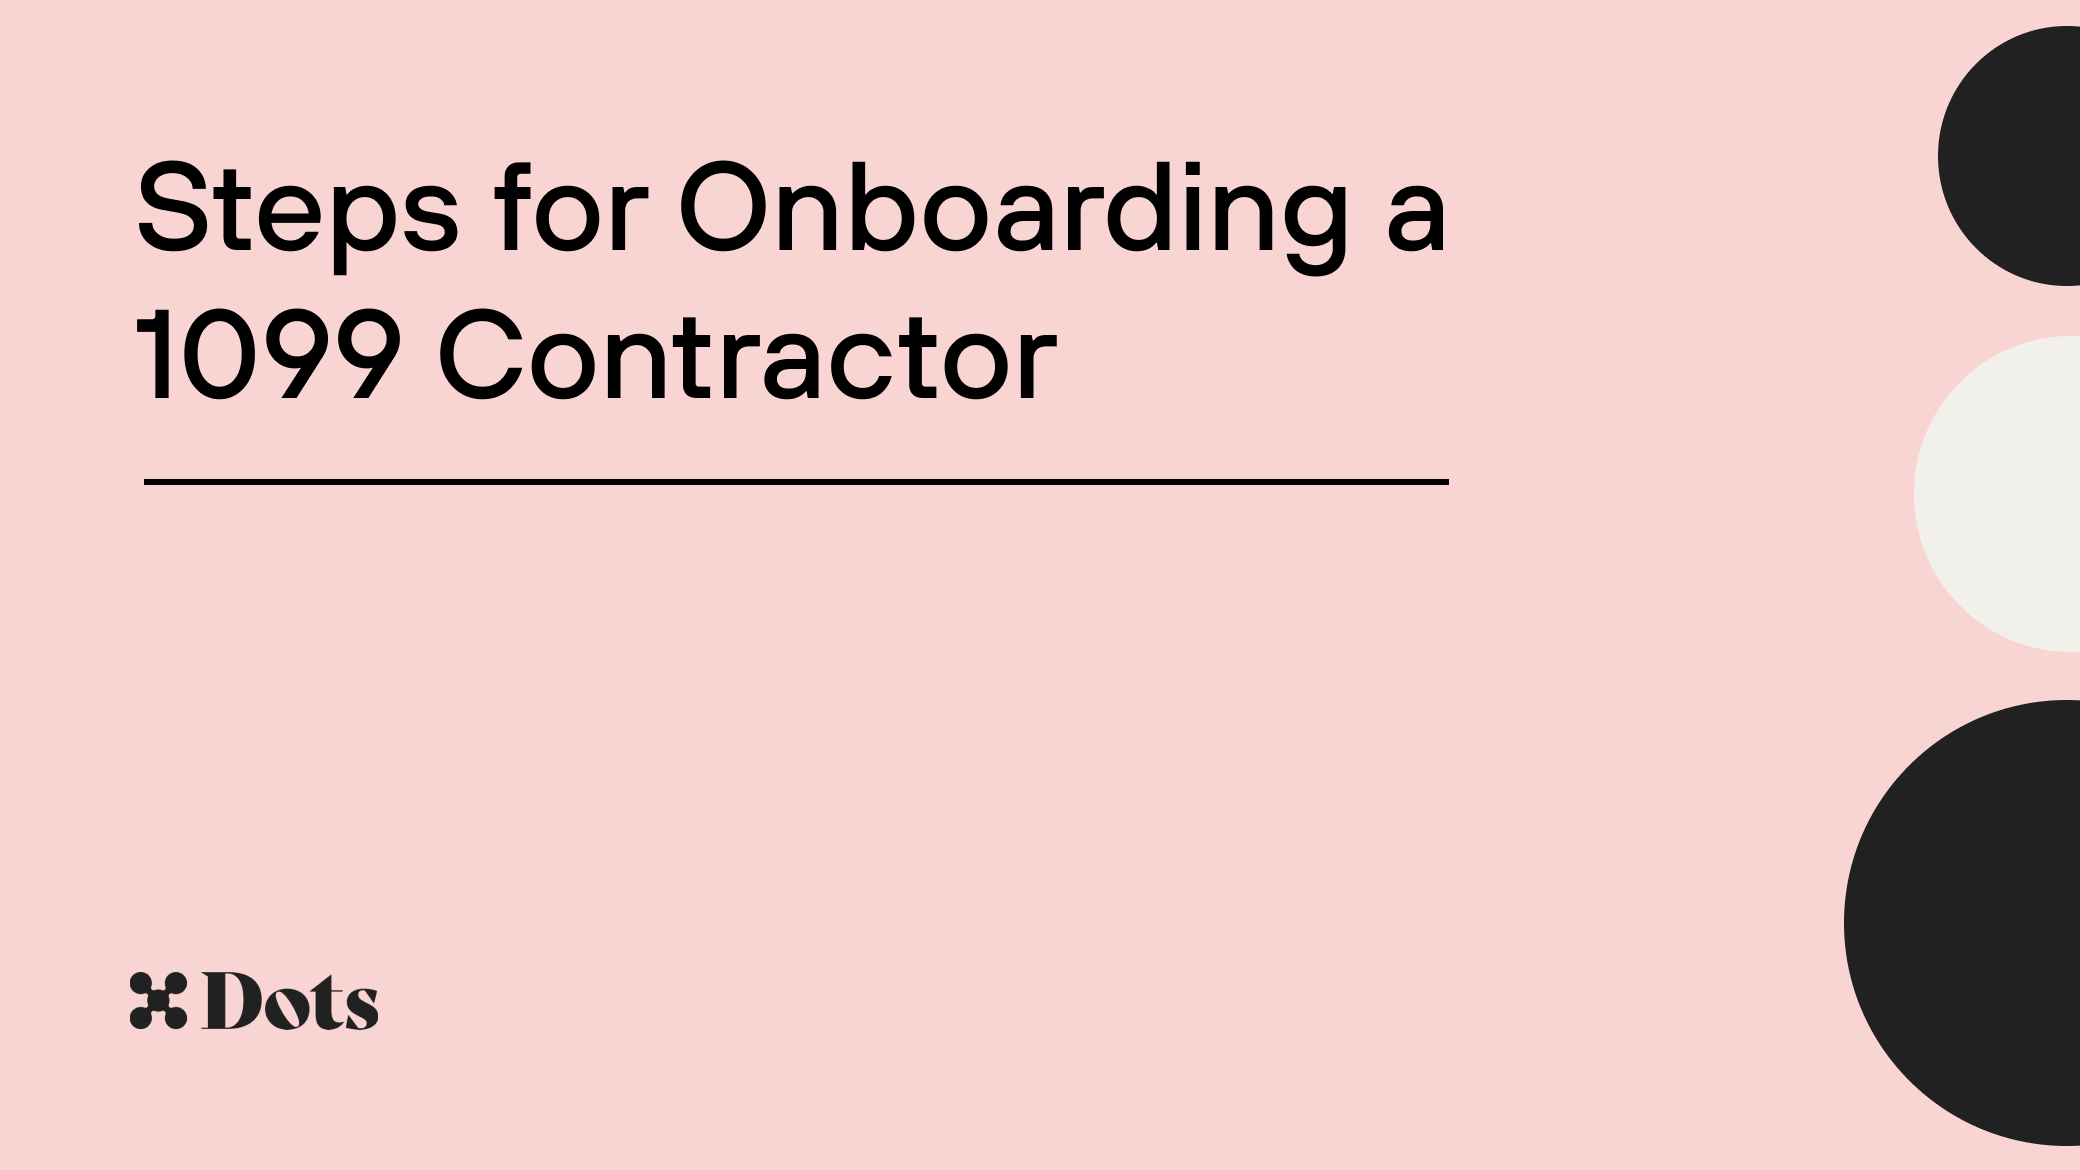 Steps for Onboarding a 1099 Contractor - Dots